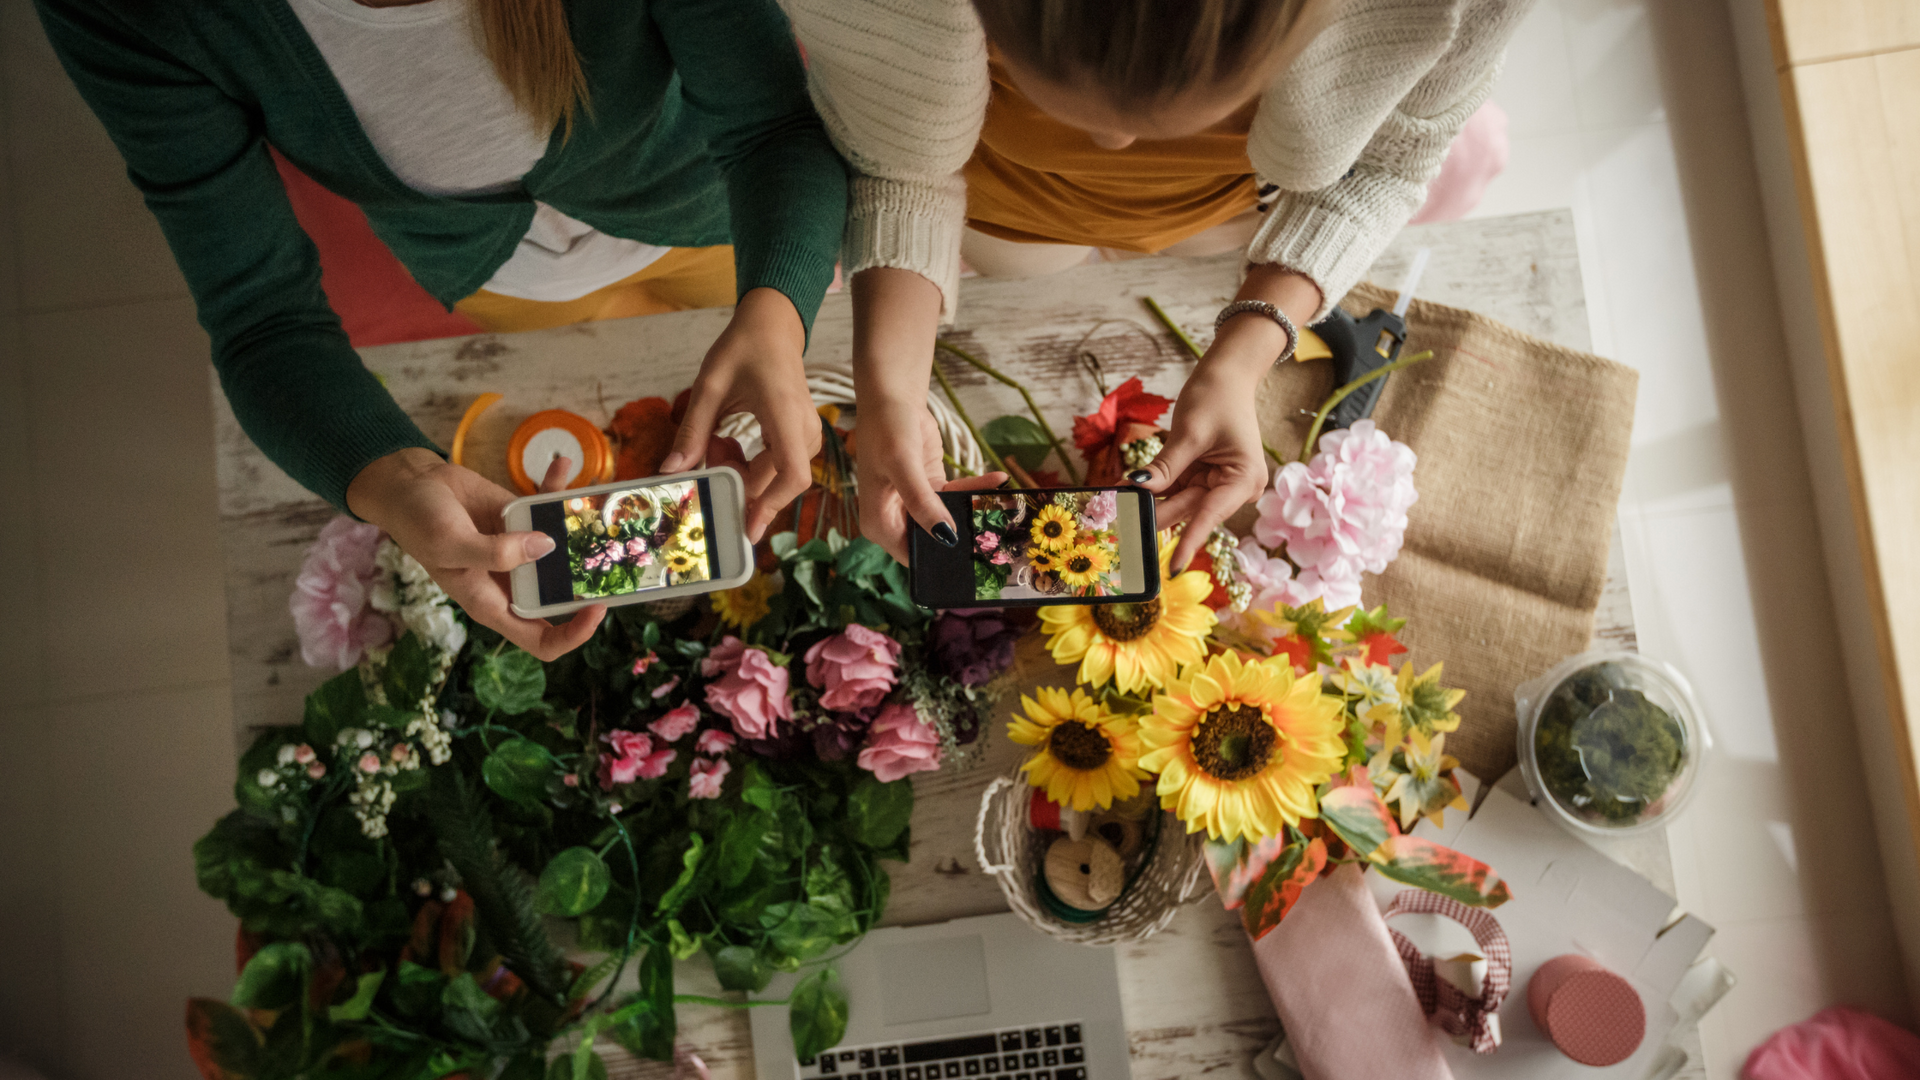 Two florists take photos of their flowers with their cameras for social media.